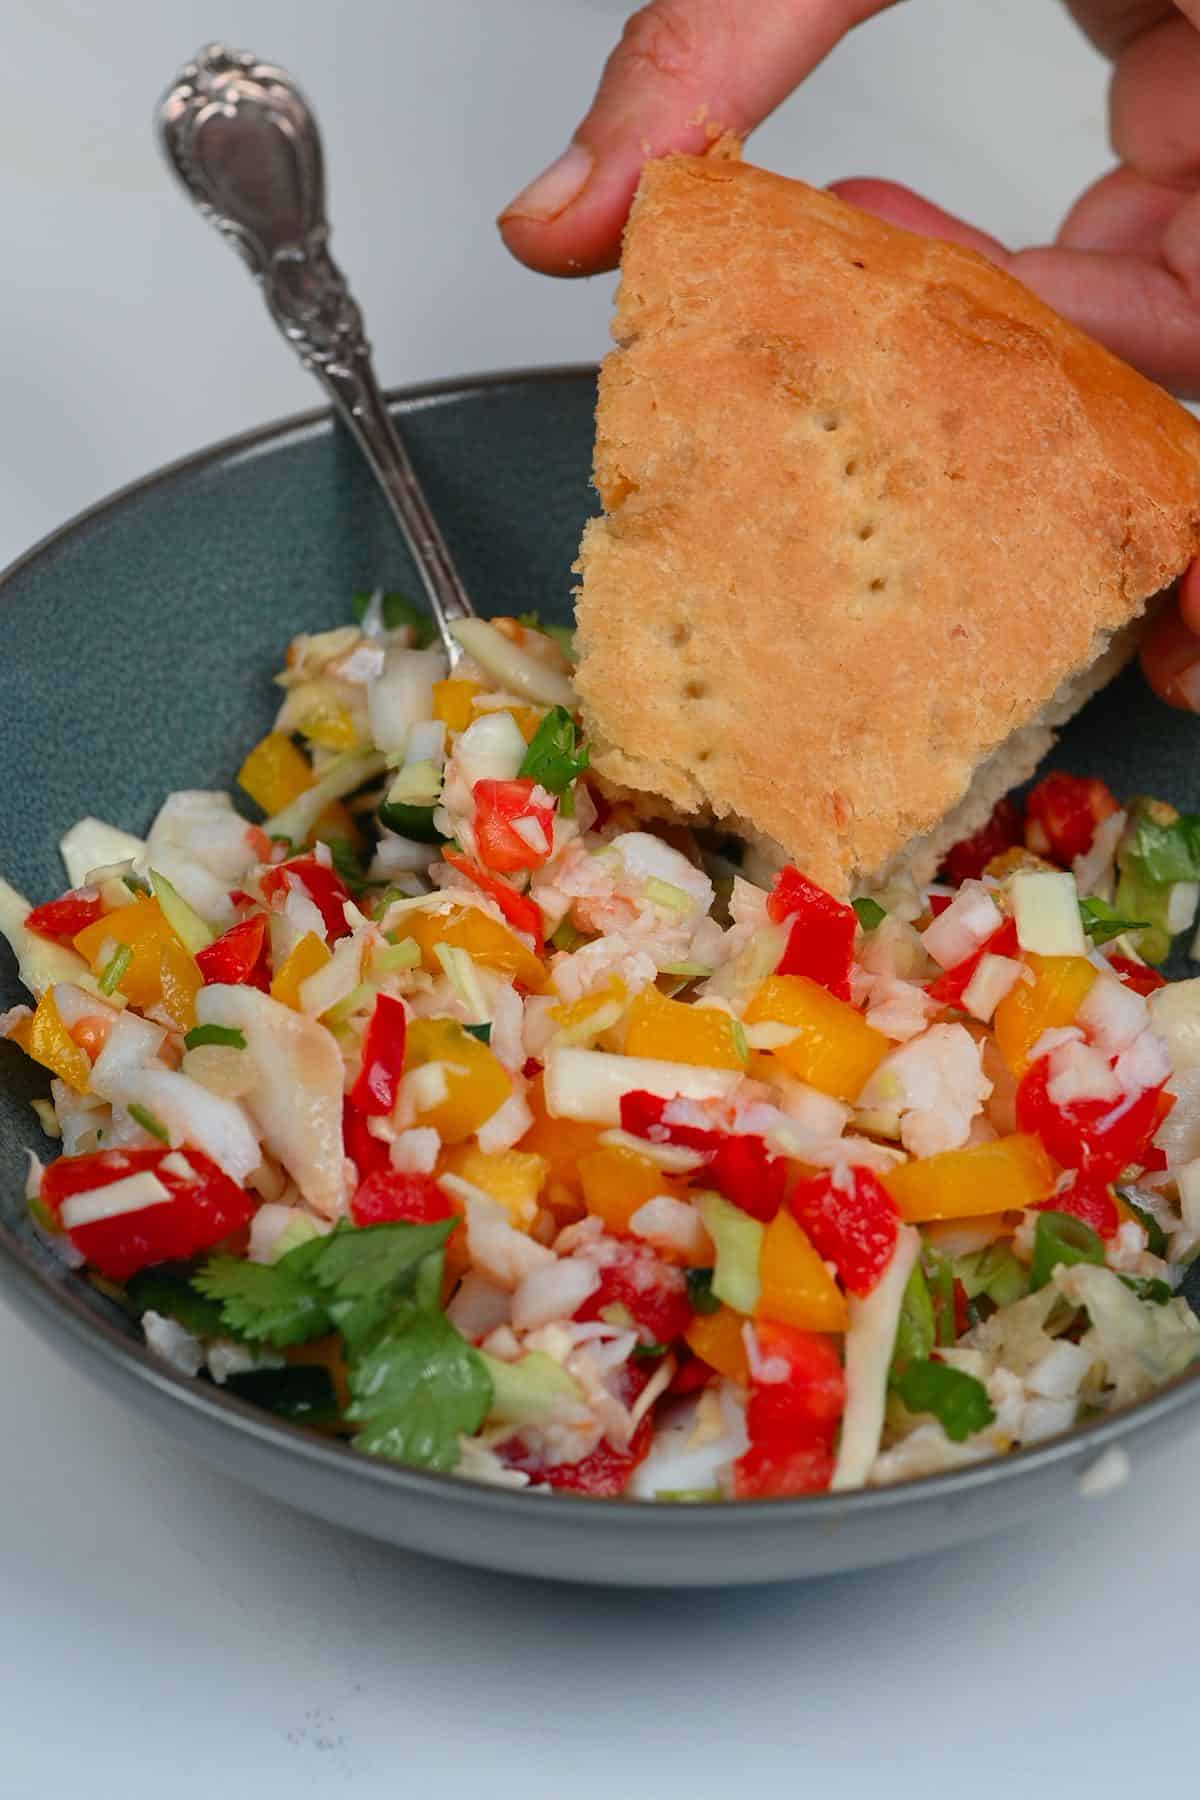 Salted cod salad and a piece of coconut bake